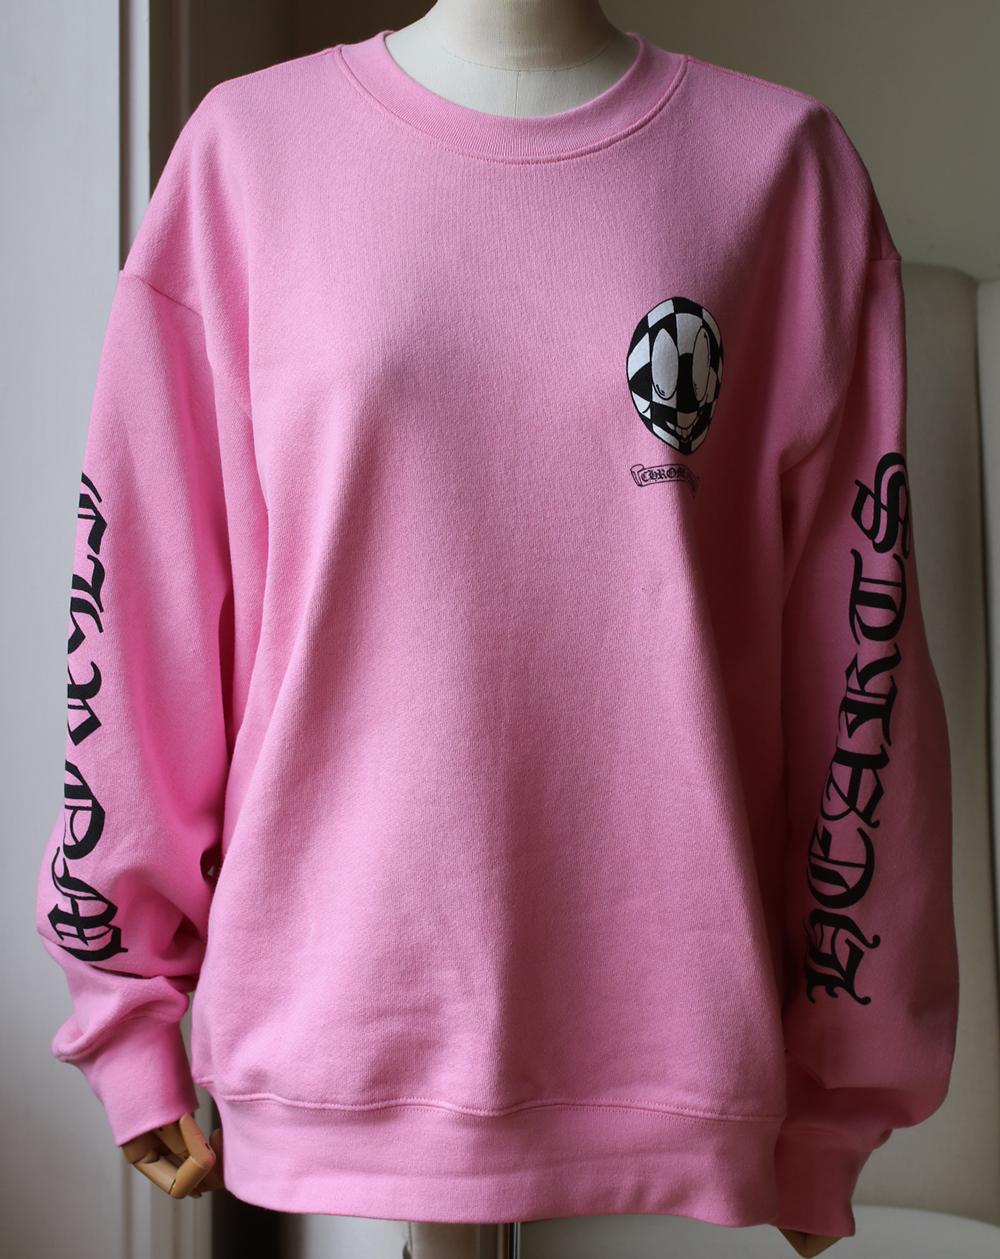 Long sleeve cotton jersey sweatshirt in pink by Chrome Hearts + Matty Boy. 
Logo printed in black and white. 
Printed detail on the back. 
Dropped shoulders.  
Rib knit collar, cuffs and hem. 
Colour: pink. 
100% Cotton. 

Size: Large (UK 12, US 8,